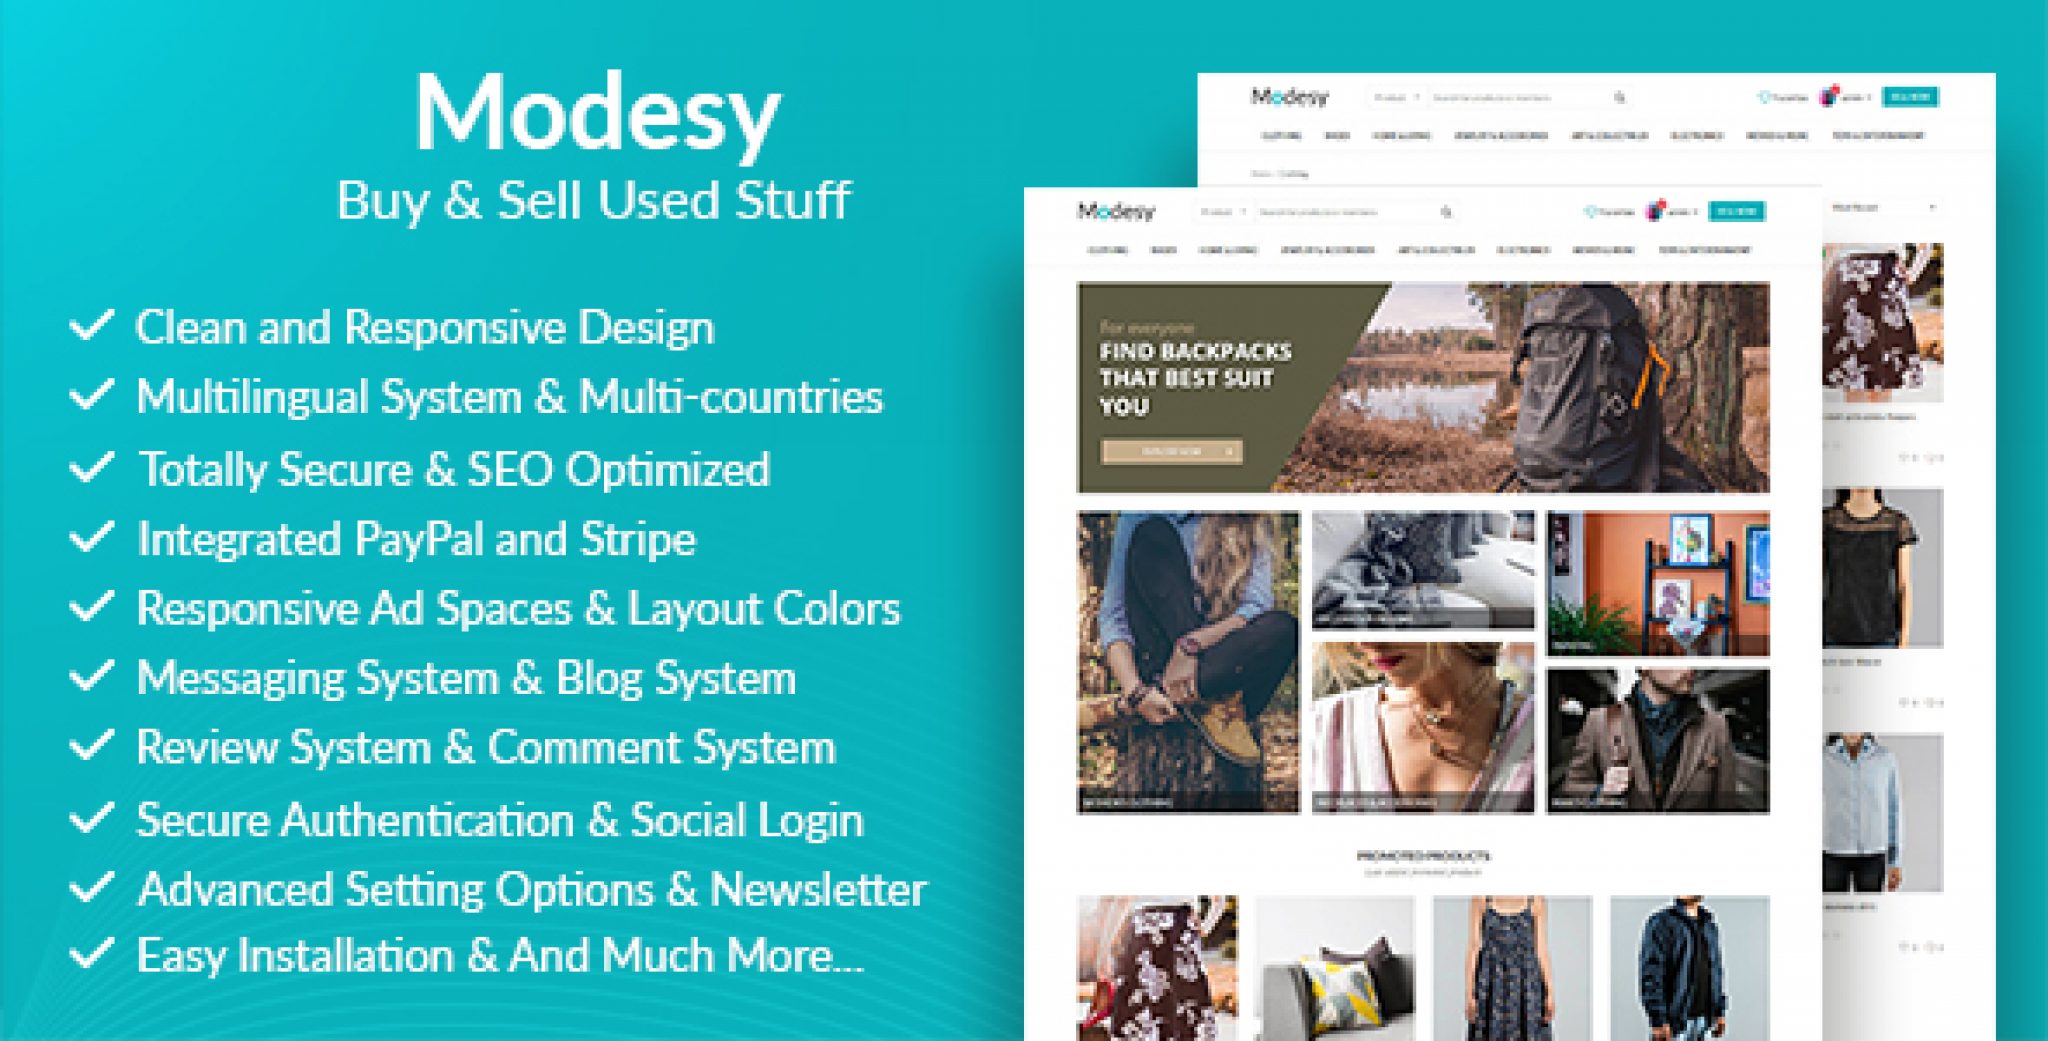 Modesy marketplace. Nulled script. Classified. Лис объявления интернет магазина. Products nulled